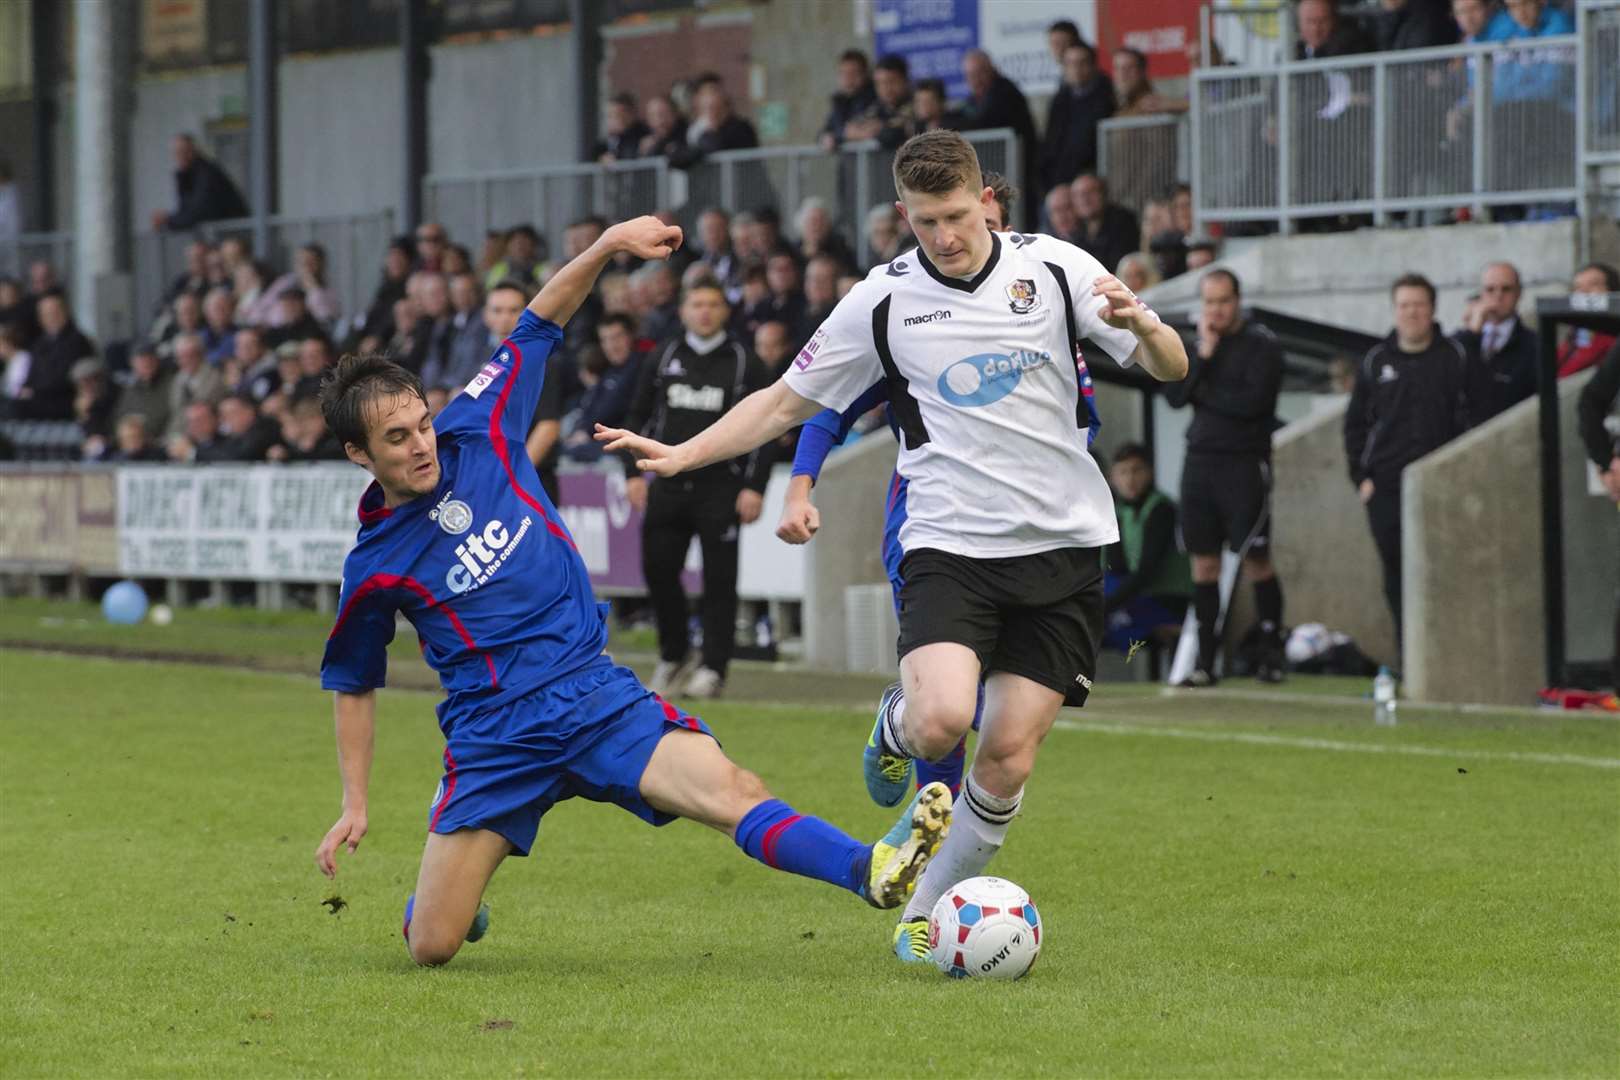 Matt Fry playing for Darford against Hyde in 2013. Picture: Andy Payton